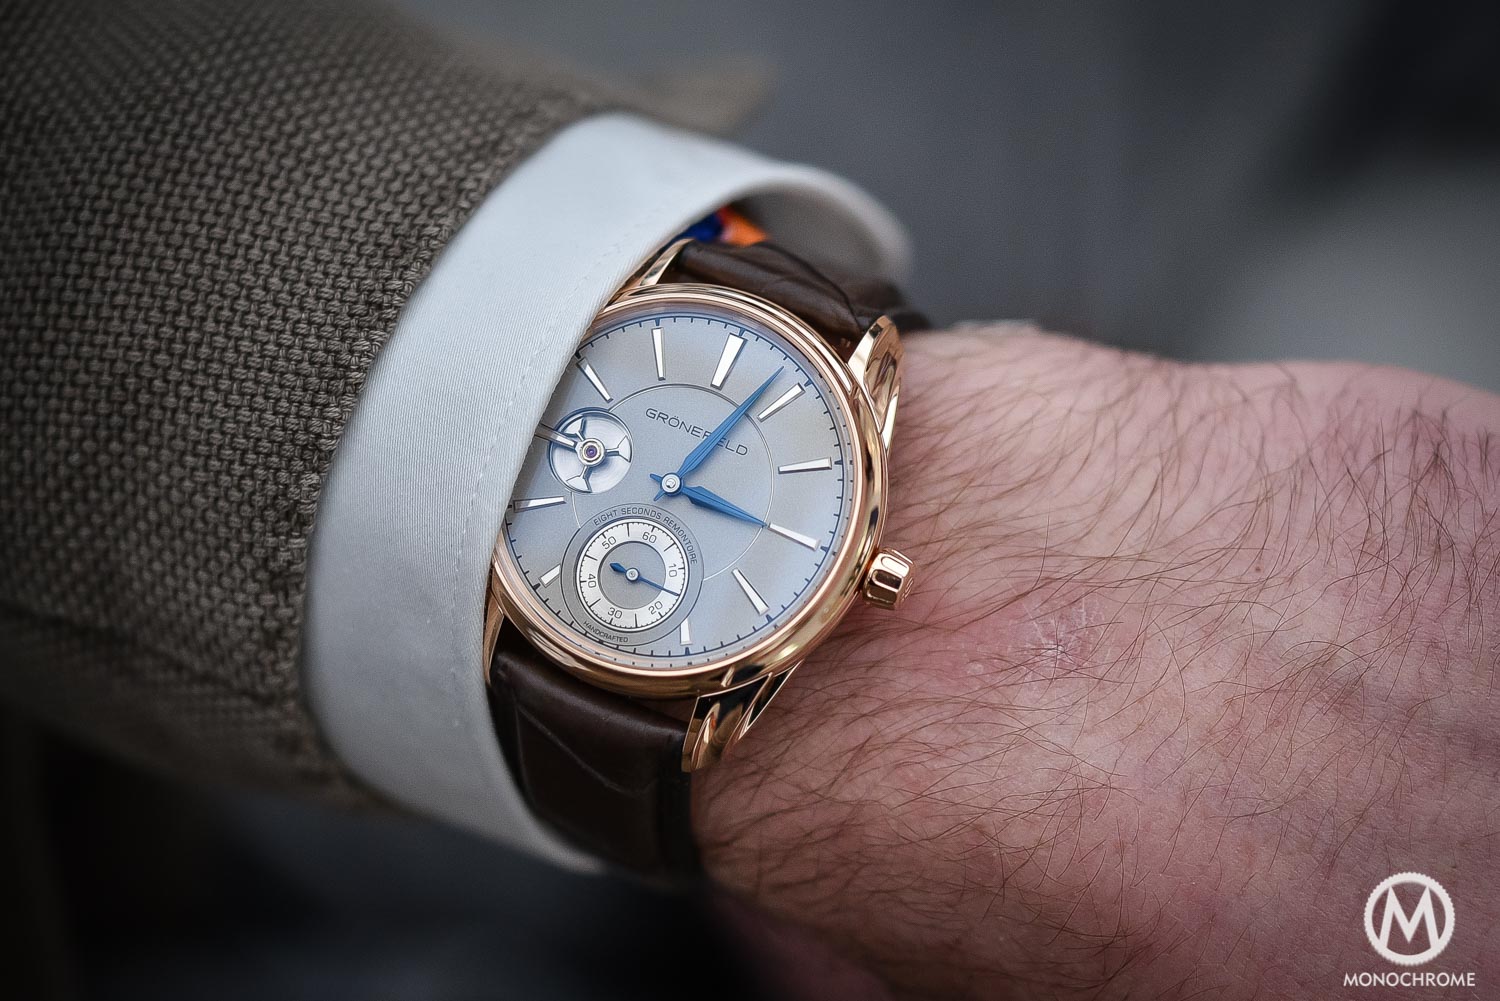 Top 5 Watches from Baselworld 2016 - Gronefeld 1941 Remontoire